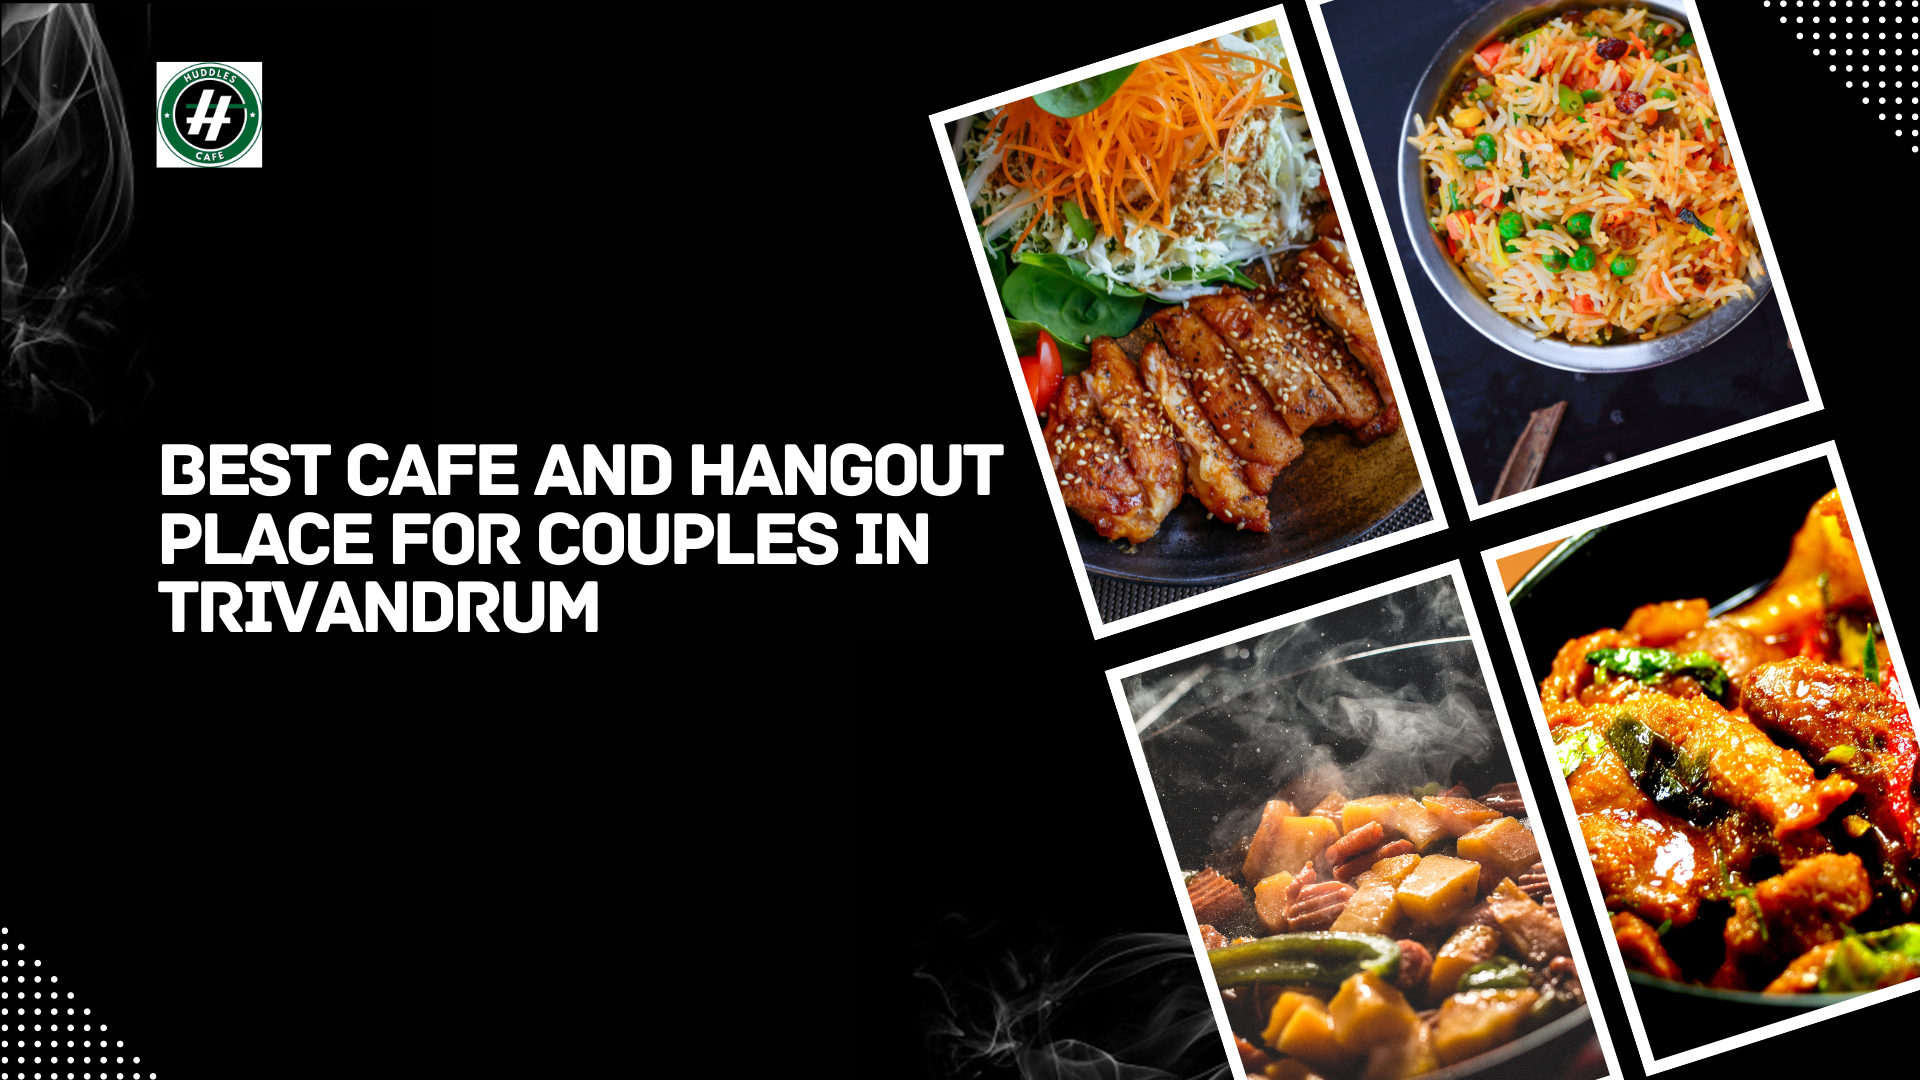 Best cafe and hangout place for couples in trivandrum